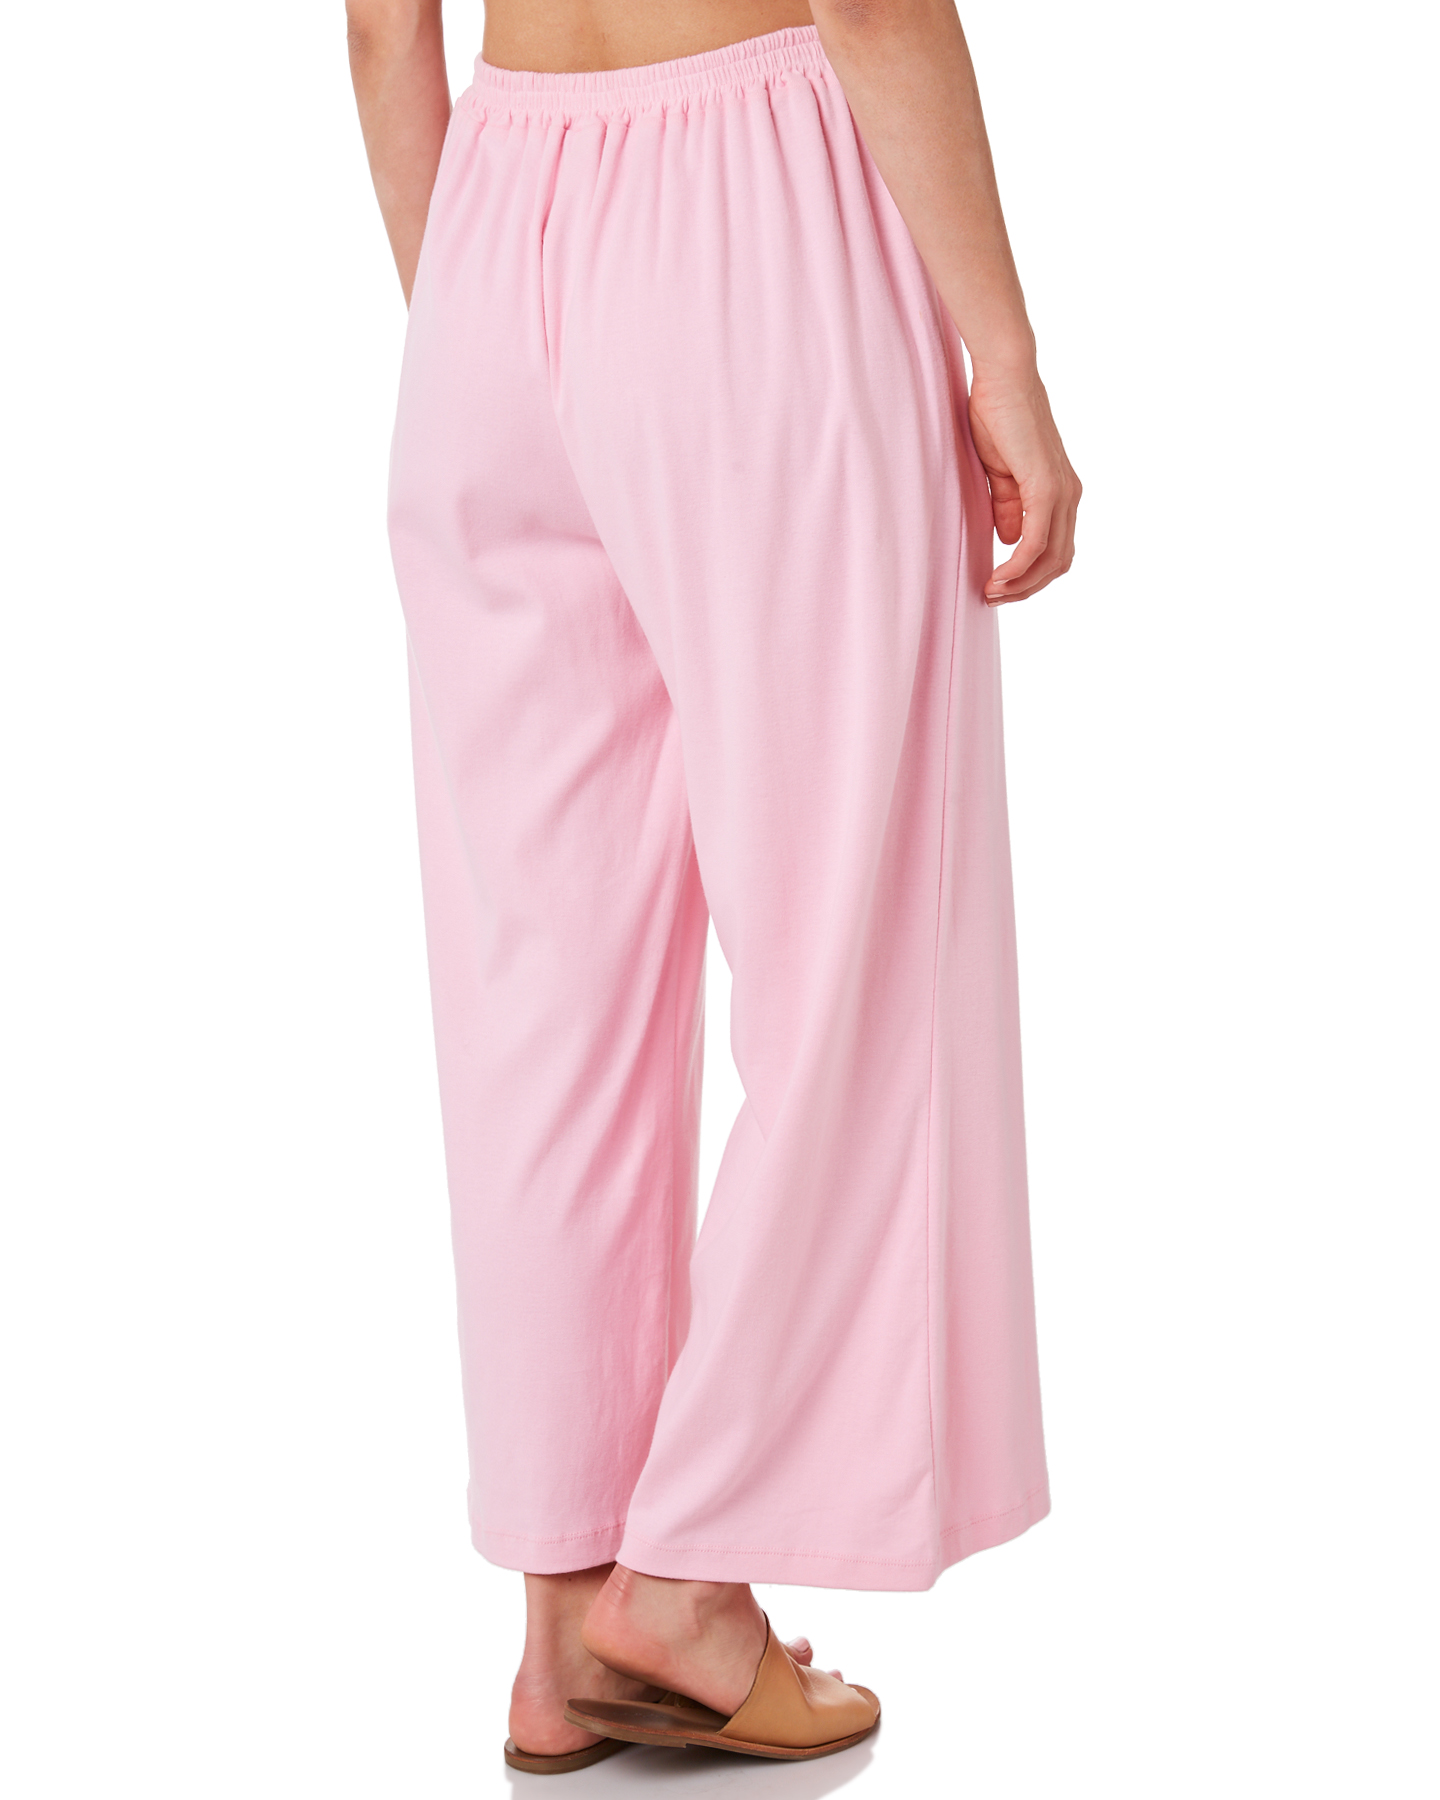 Zulu And Zephyr Fever Pant - Pink | SurfStitch